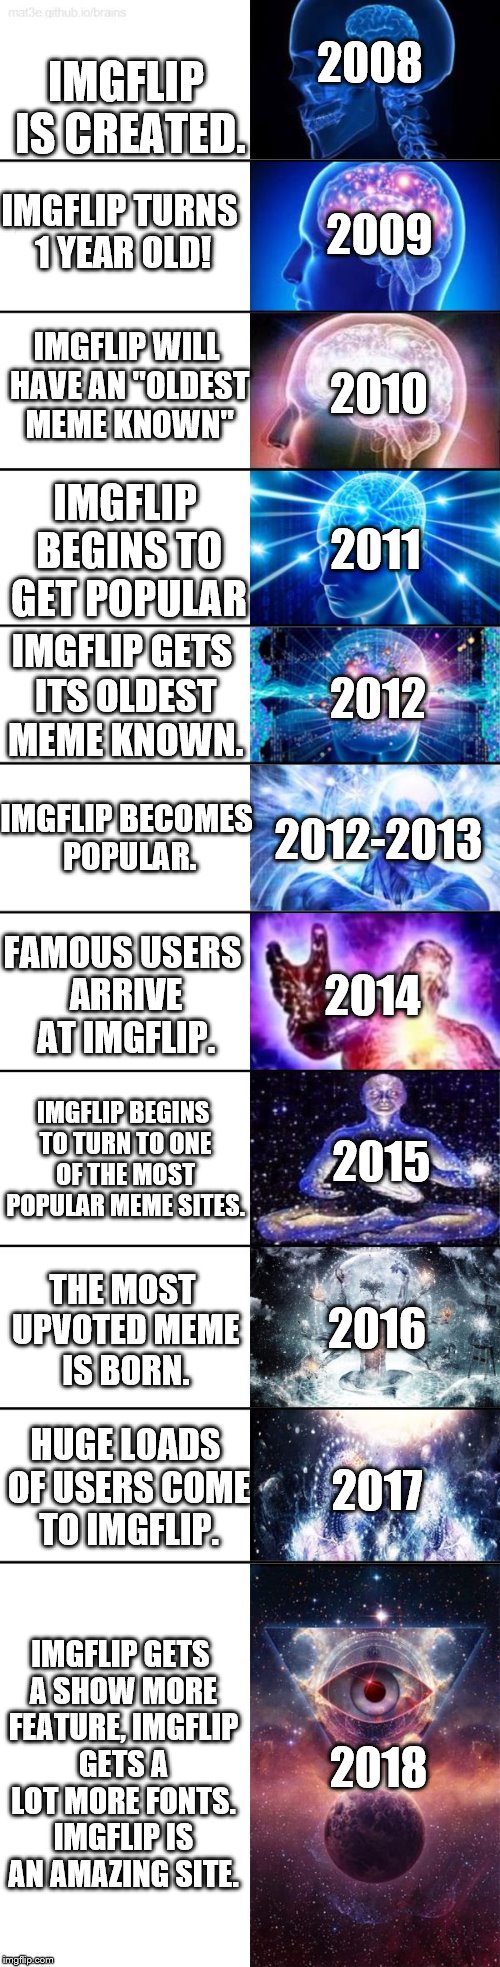 The Timeline of Imgflip | IMGFLIP IS CREATED. 2008; IMGFLIP TURNS 1 YEAR OLD! 2009; IMGFLIP WILL HAVE AN "OLDEST MEME KNOWN"; 2010; IMGFLIP BEGINS TO GET POPULAR; 2011; IMGFLIP GETS ITS OLDEST MEME KNOWN. 2012; IMGFLIP BECOMES POPULAR. 2012-2013; FAMOUS USERS ARRIVE AT IMGFLIP. 2014; 2015; IMGFLIP BEGINS TO TURN TO ONE OF THE MOST POPULAR MEME SITES. THE MOST UPVOTED MEME IS BORN. 2016; HUGE LOADS OF USERS COME TO IMGFLIP. 2017; IMGFLIP GETS A SHOW MORE FEATURE, IMGFLIP GETS A LOT MORE FONTS. IMGFLIP IS AN AMAZING SITE. 2018 | image tagged in extended expanding brain,imgflip,meanwhile on imgflip,time,timeline,memes | made w/ Imgflip meme maker